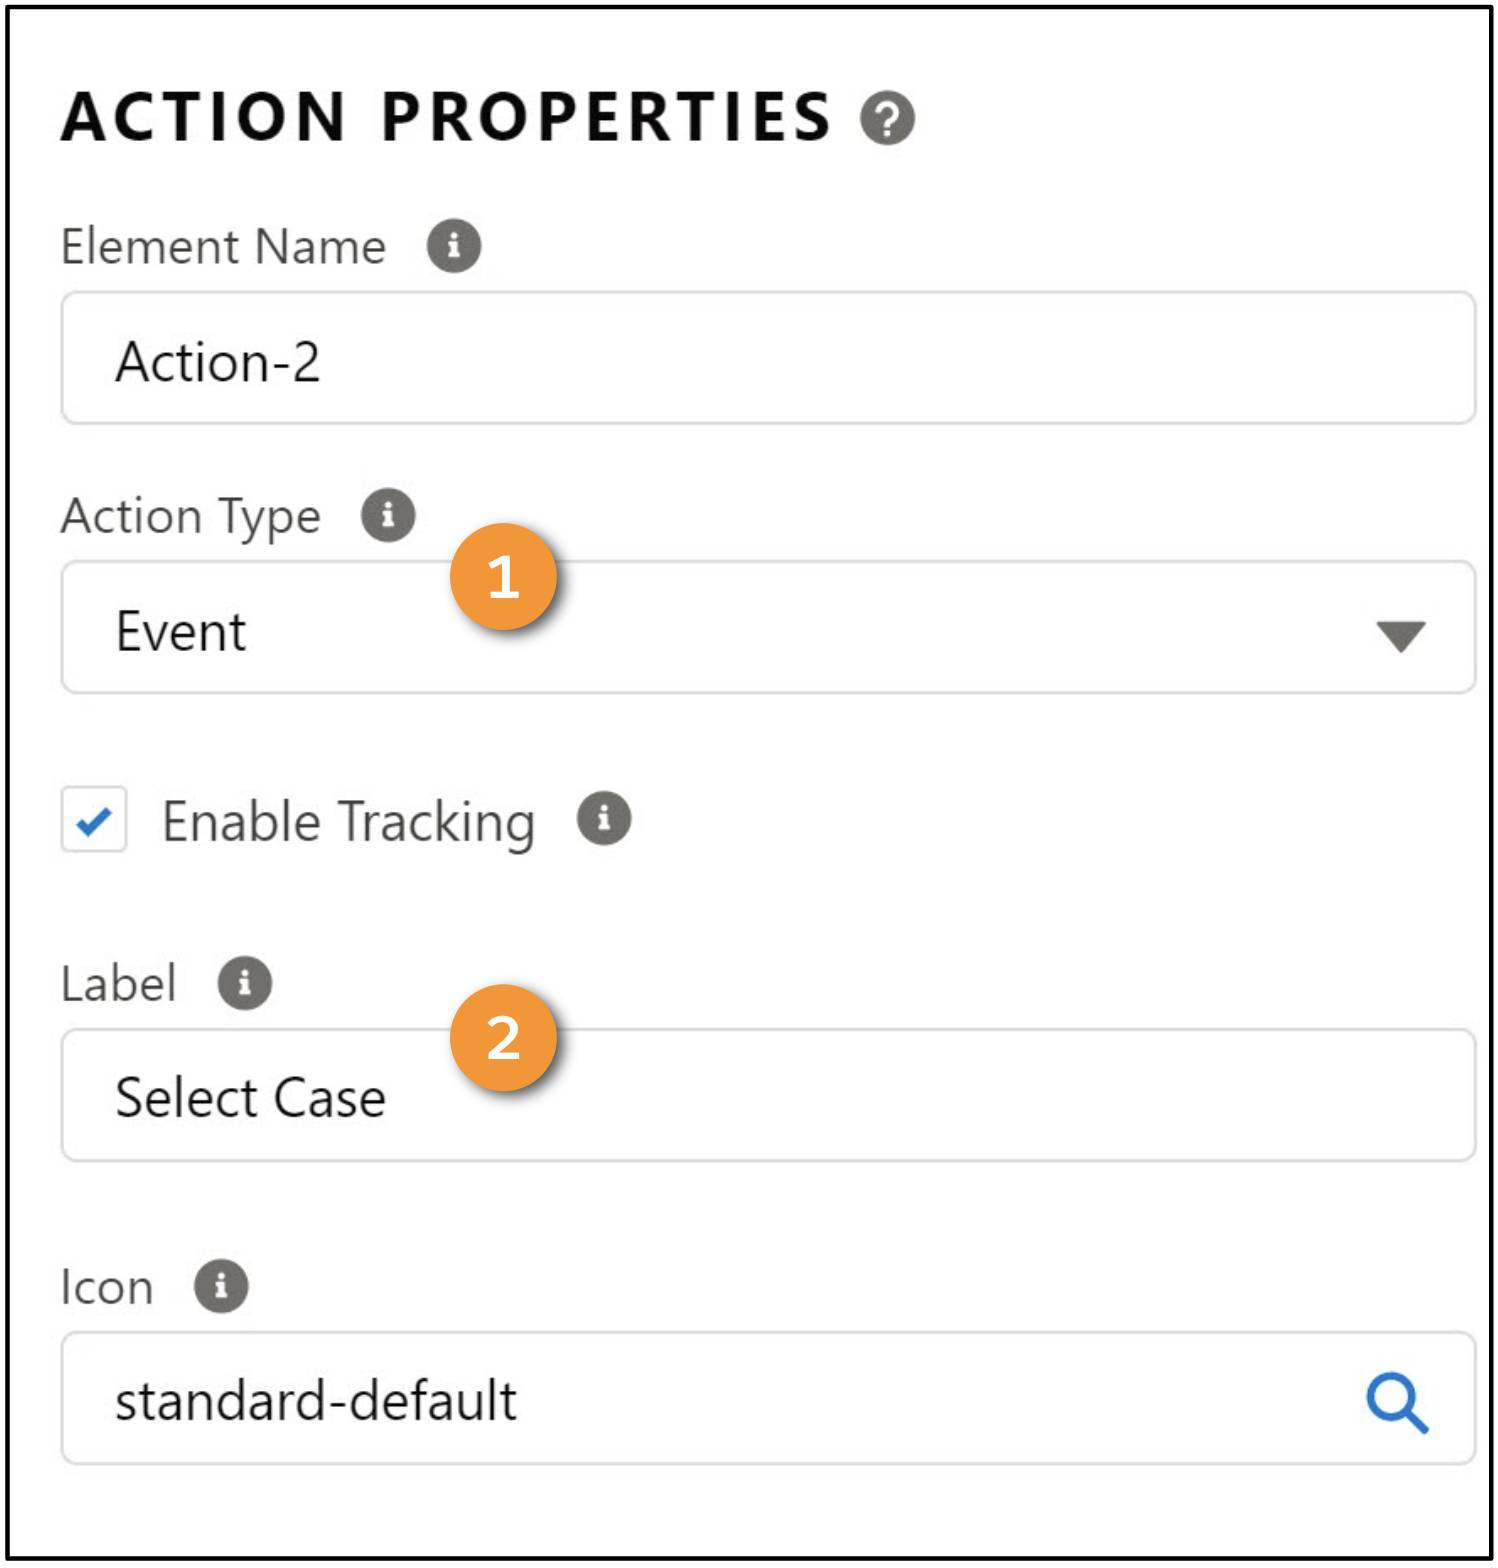 The Select Case action properties include the Action Type and Label.